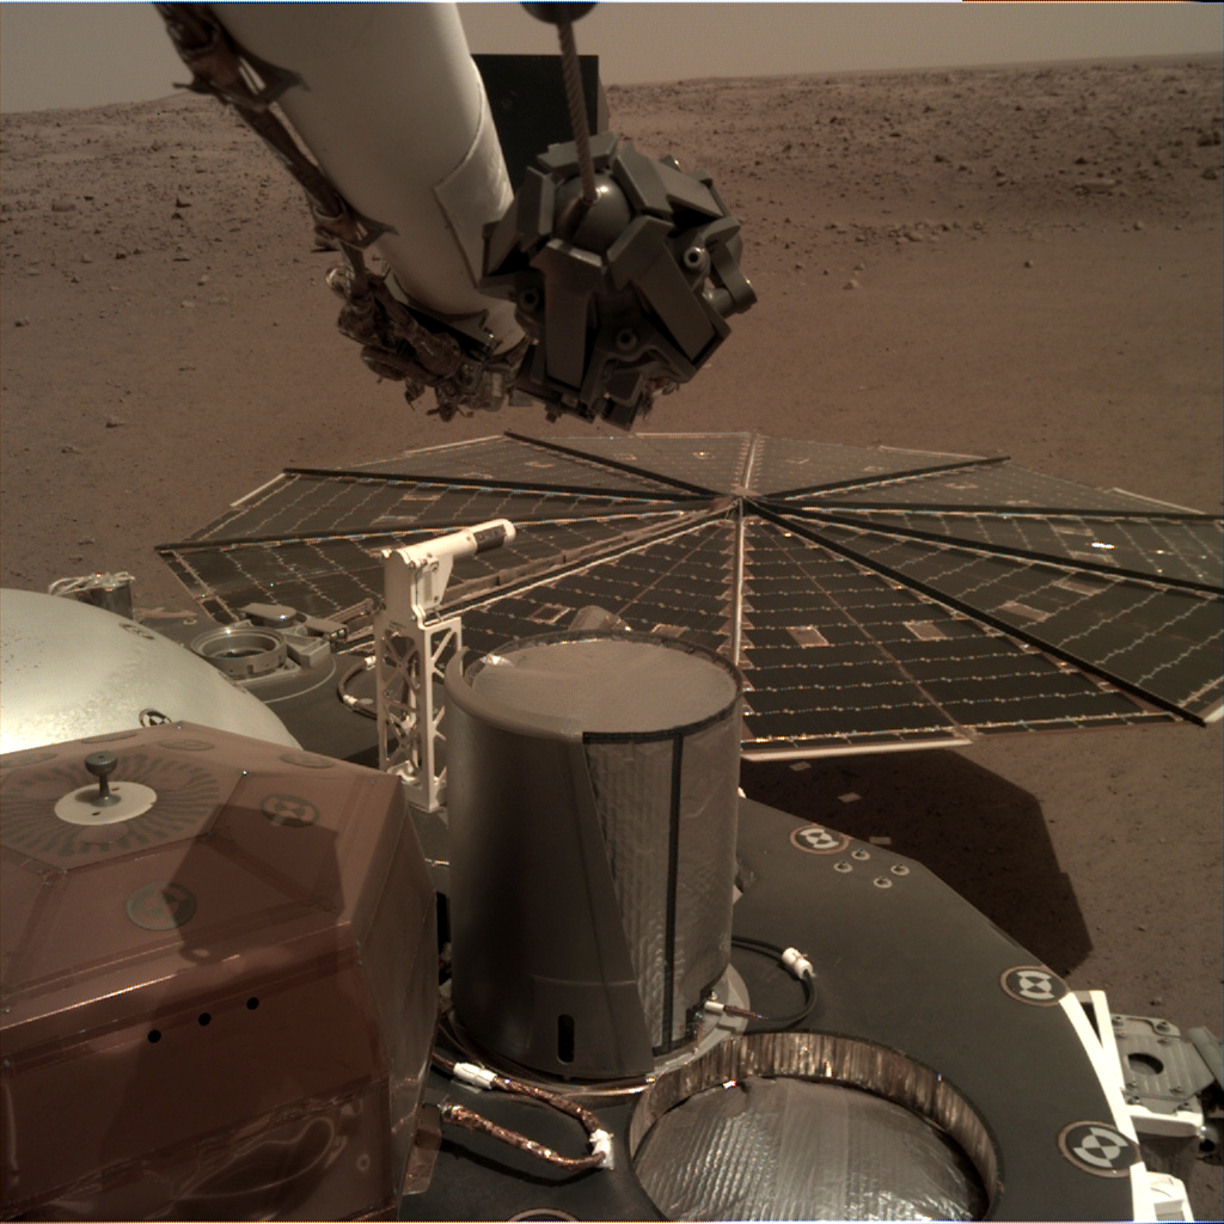 Heavy machinery on the surface of Mars